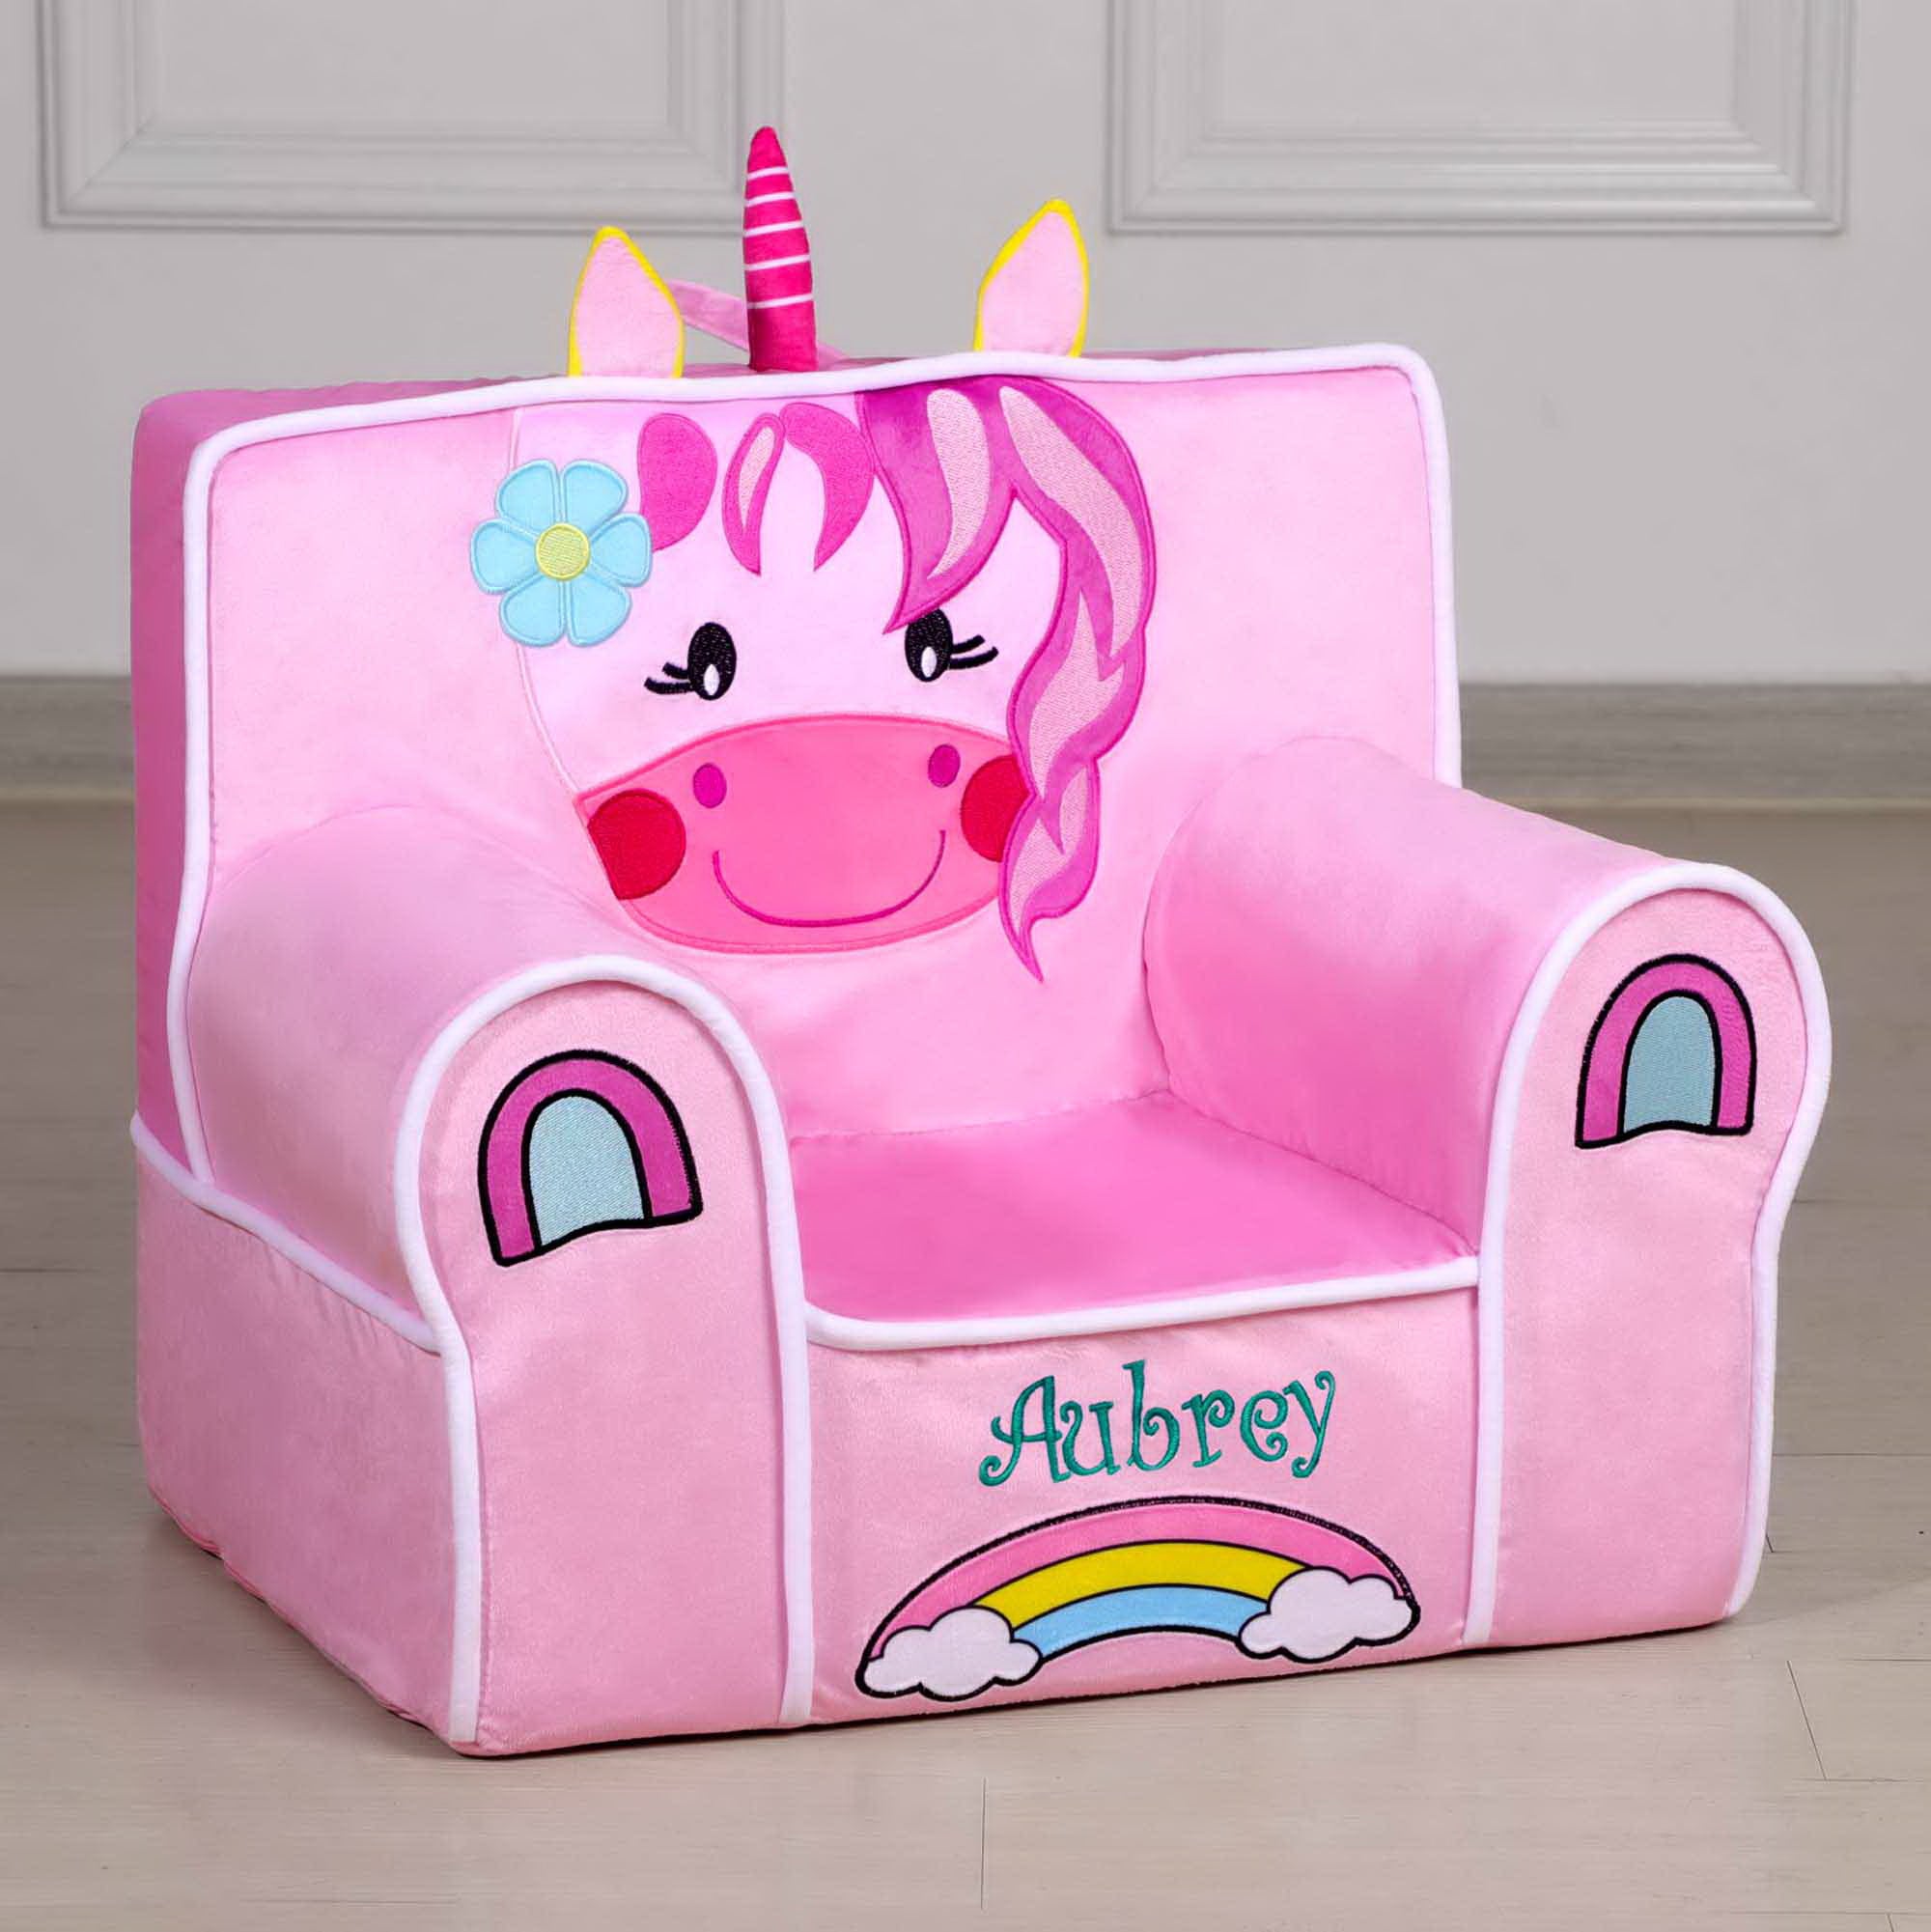 Personalized Creative Wonders Toddler Chair - Ages 1.5 to 4 Years Old (Unicorn)